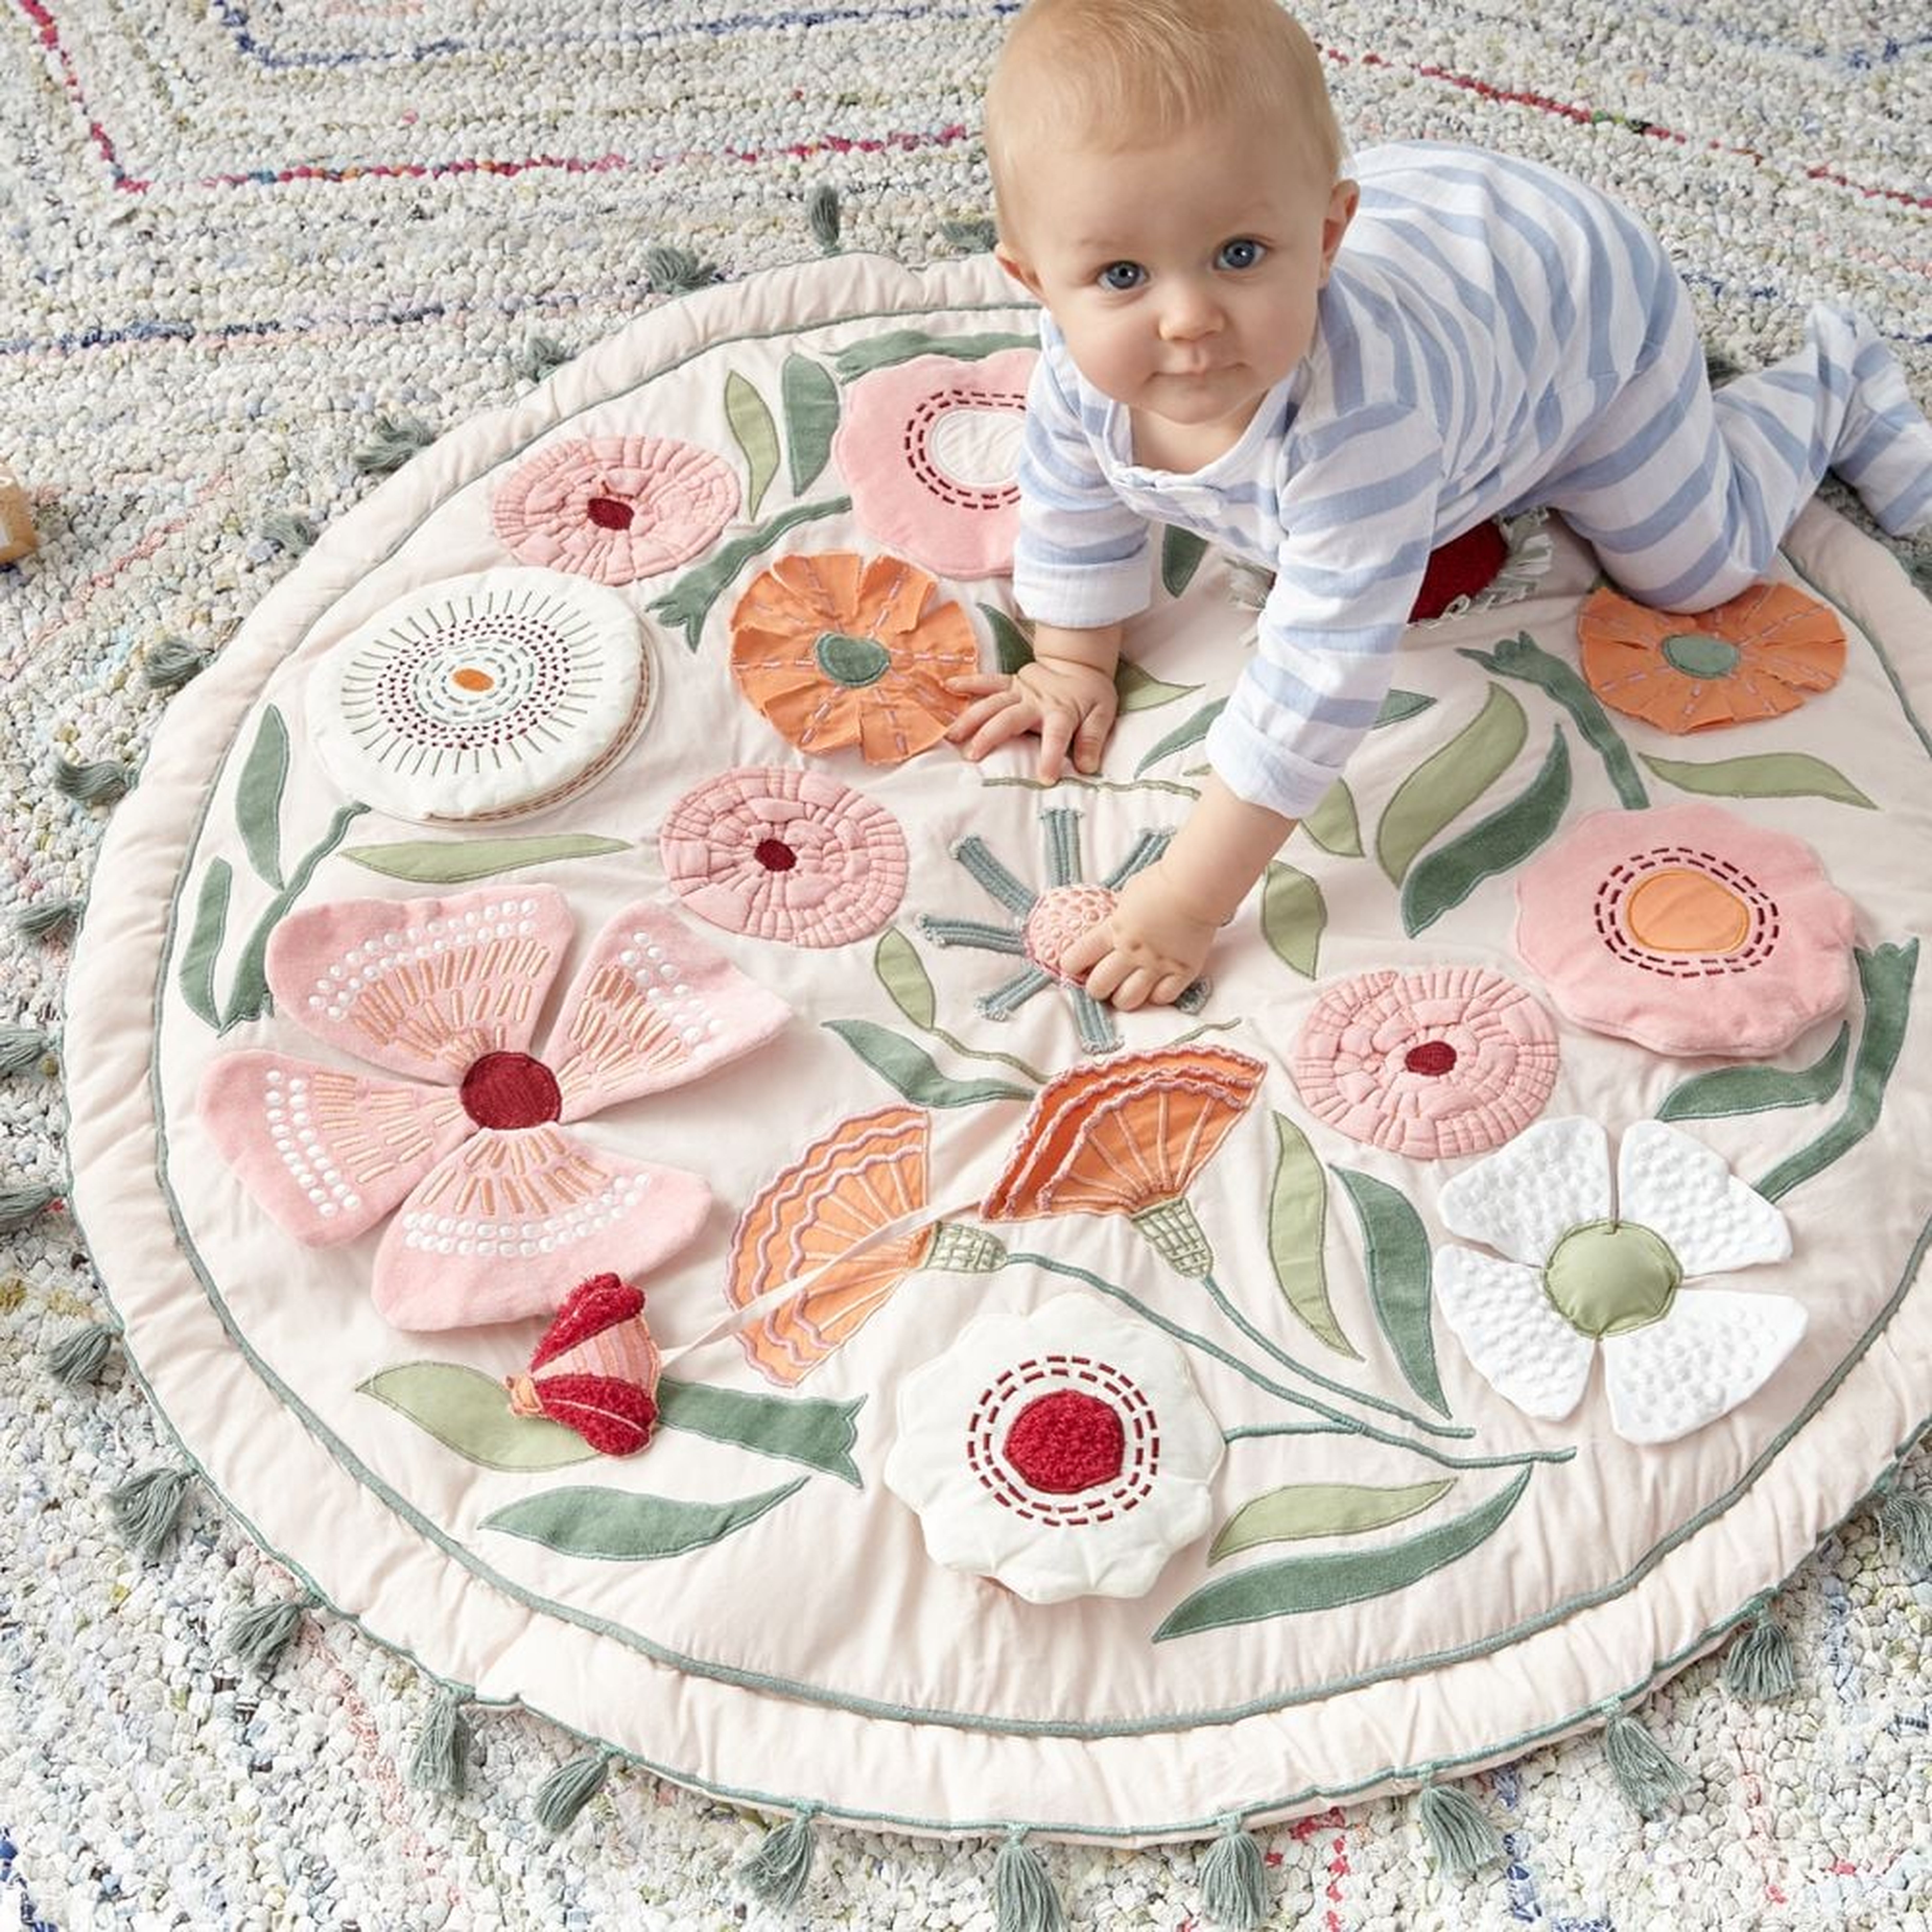 Floral Garden Baby Activity Play Mat - Crate and Barrel